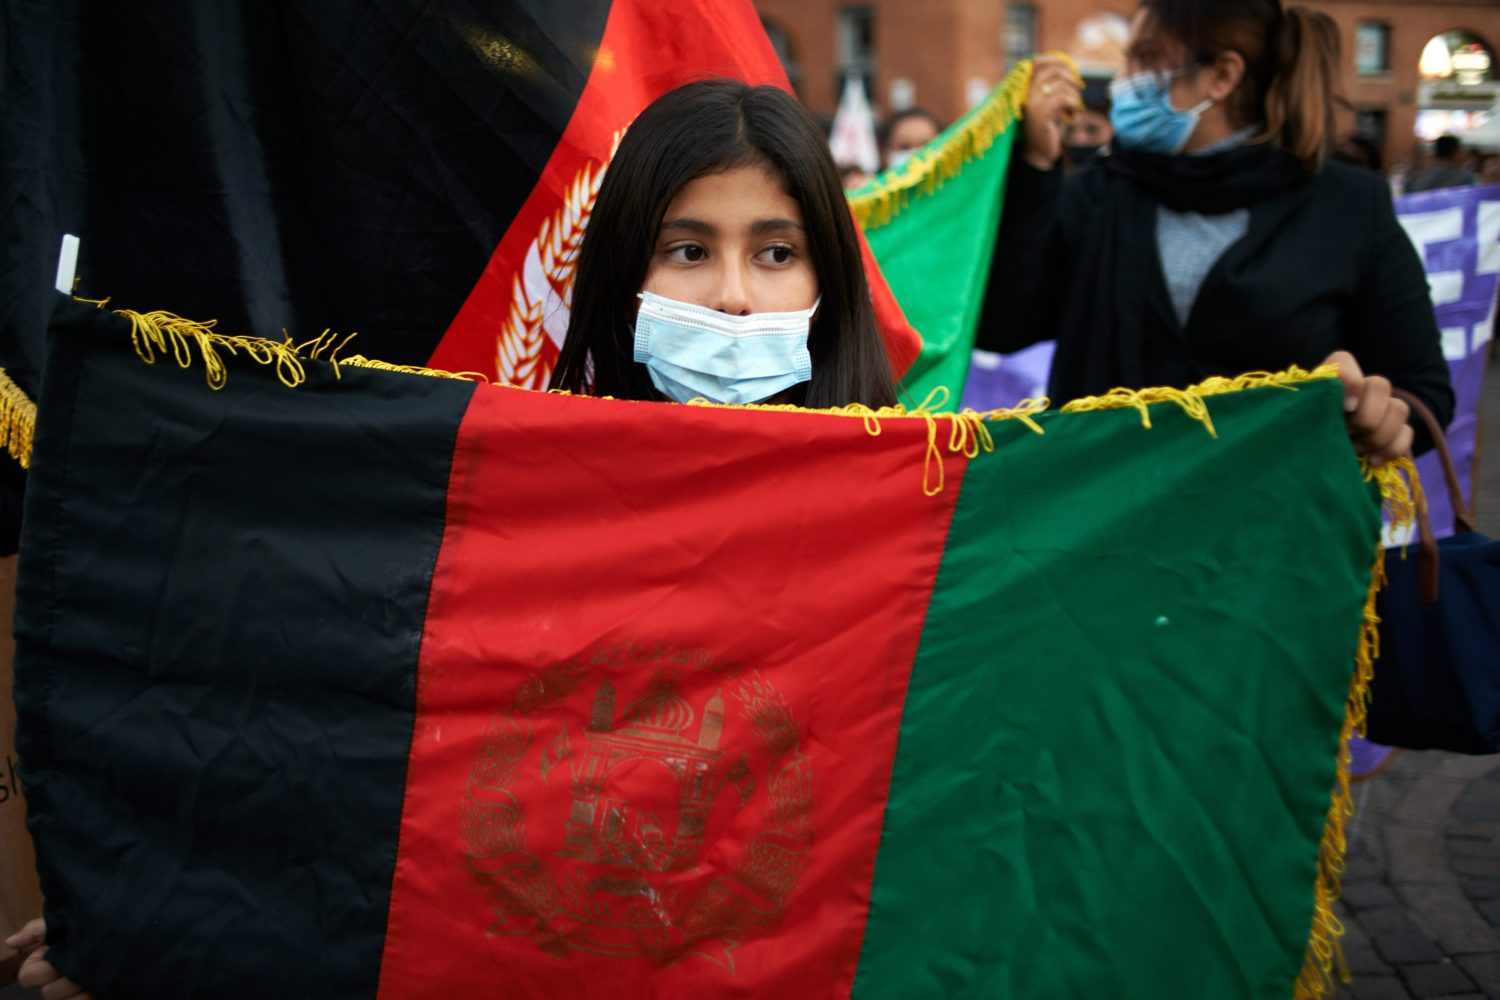 An Afghnai girl holds the national flag of Afghanistan. Dozens of people (women's empowerment, LGBT+ and lesbians organizations) and members of the Afghani community of Toulouse organized a gathering and a protest in Toulouse to raise awereness about the Afghanistan's situation and mainly about Afghan' women dire situation under Taliban's rule. After the Trump's decision (and applied by Biden) to pull out all US soldiers from Aghanistan after 20 years of war, the lightning advance of Talibans towards Kabul and the seizure of it, thousands of Afghans tried to escape. The Afghani community and feminist organiszations are worried about girls and women situation under Taliban's rule.Toulouse. France. October 7th 2021. (Photo by Alain Pitton/NurPhoto)NO USE FRANCE